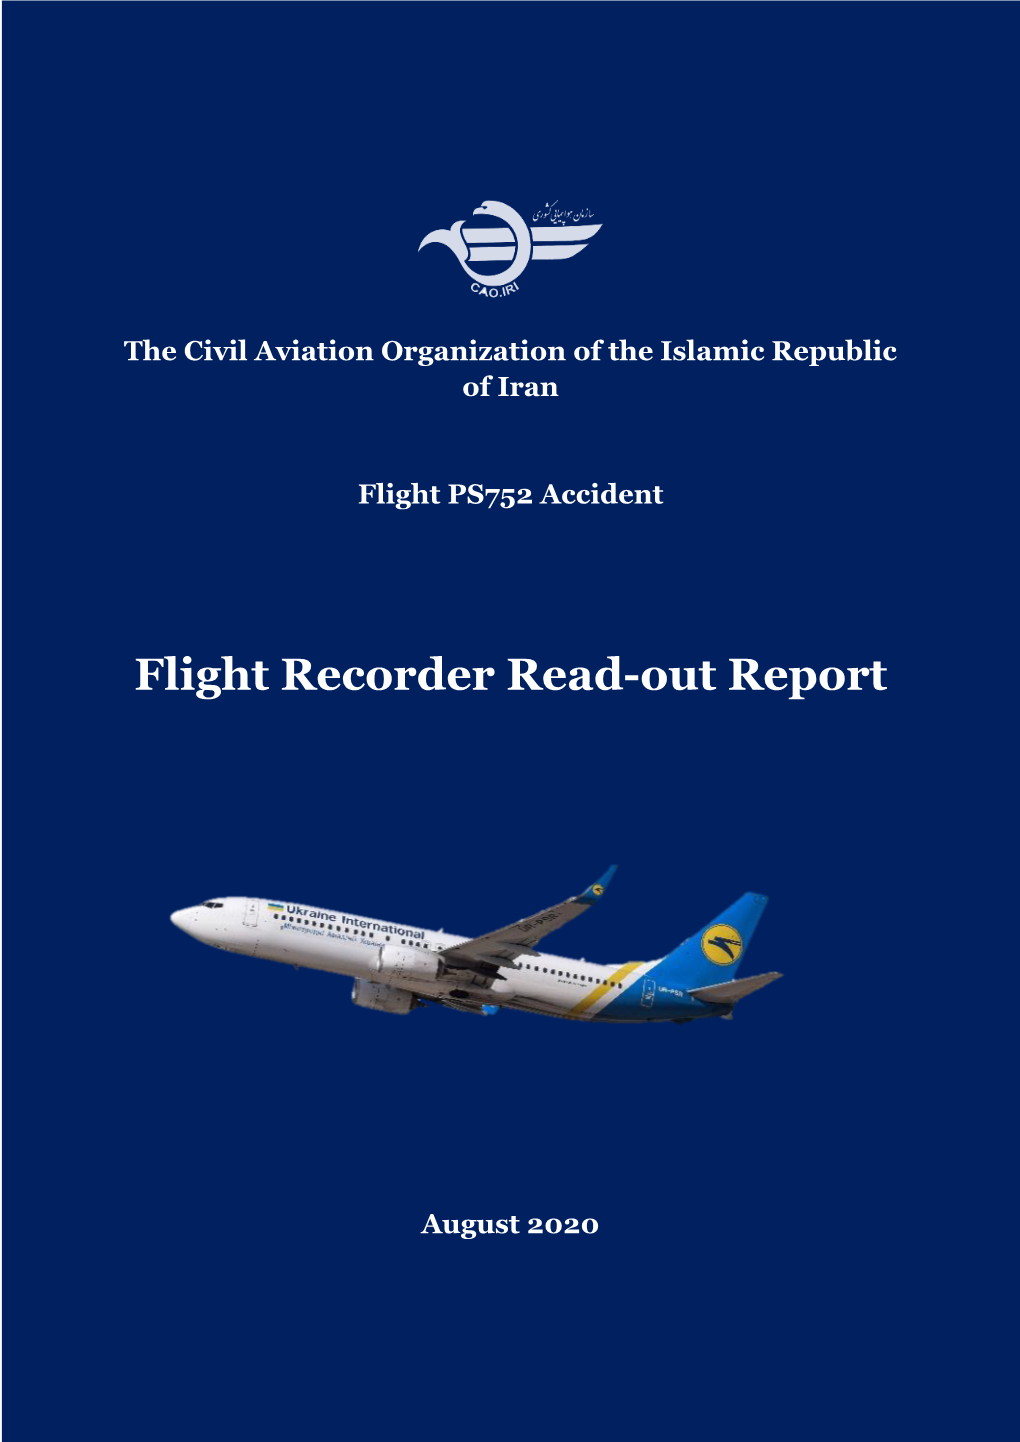 Flight Recorder Read-Out Report